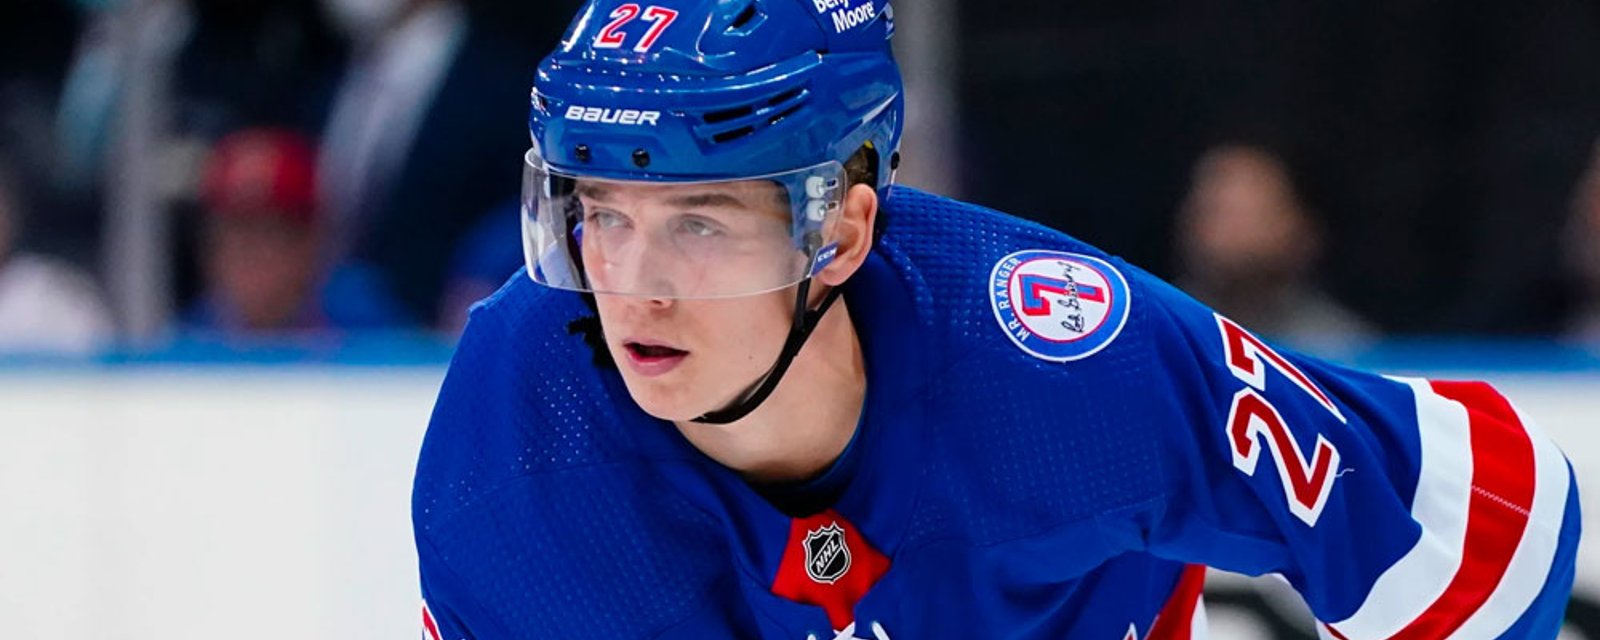 Trade Alert: Rangers have reportedly traded top prospect Nils Lundkvist